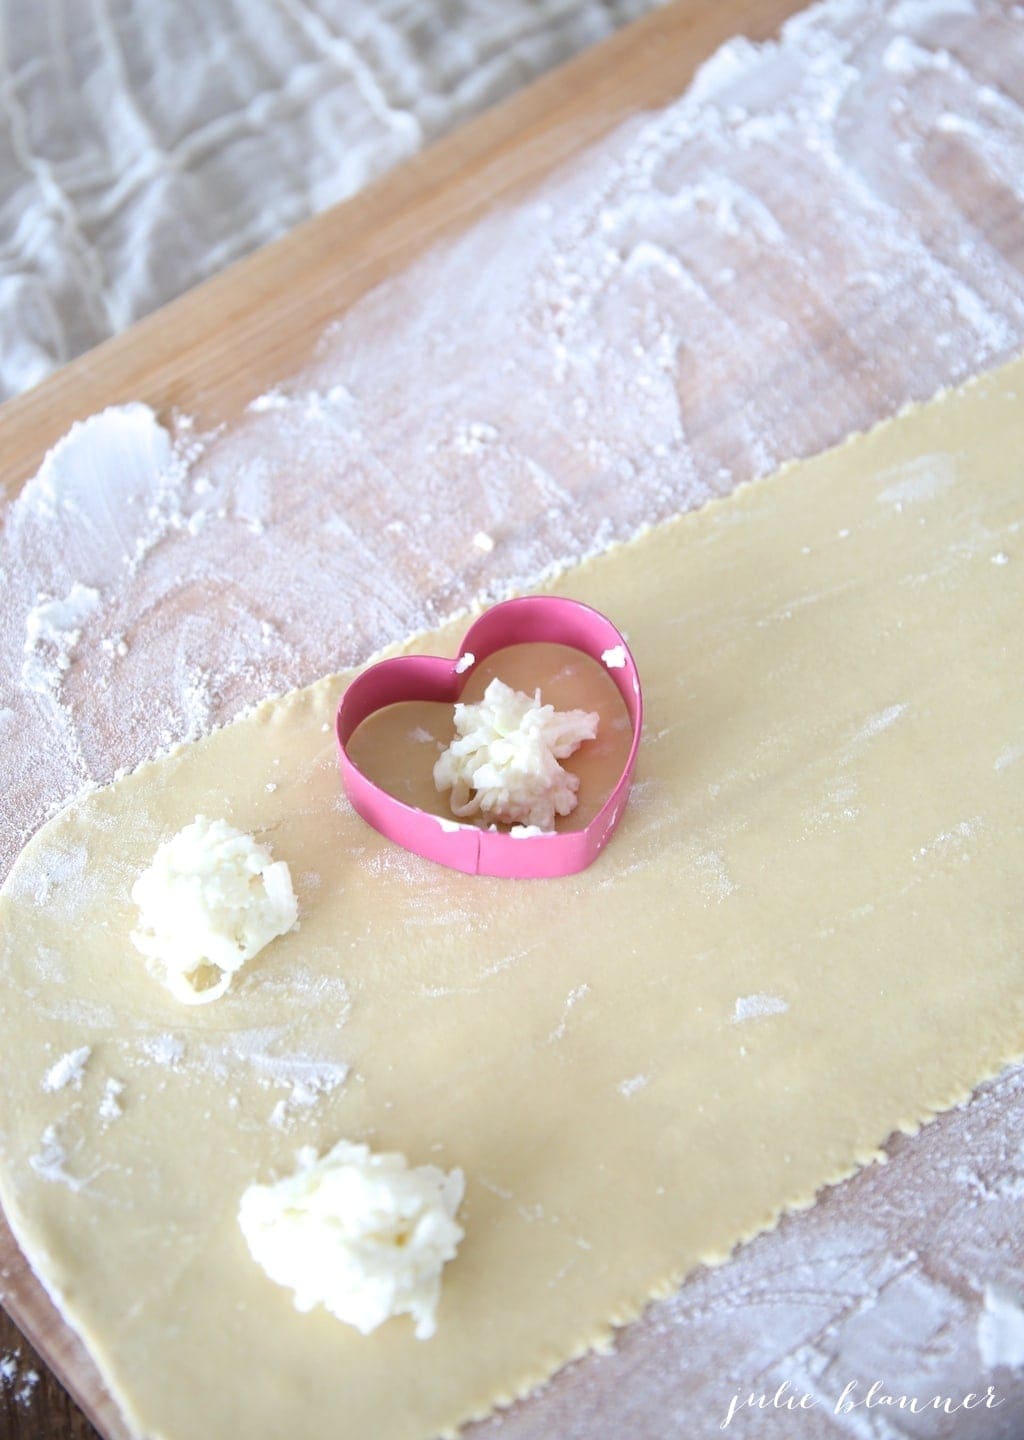 A thin sheet of pasta on a floured wooden surface, pink heart cookie cutter forming homemade ravioli.